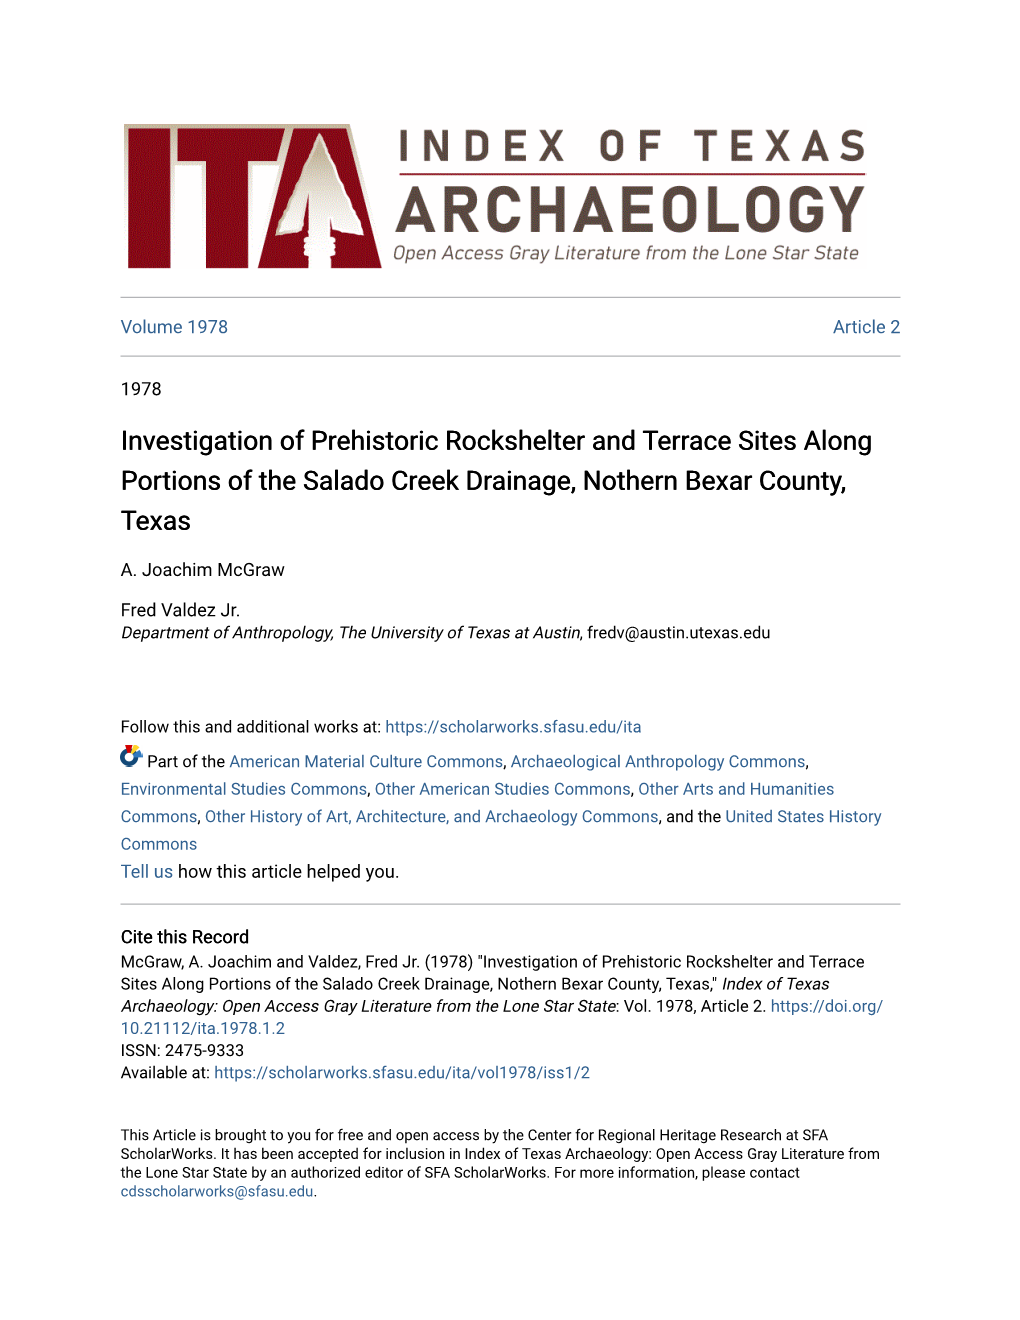 Investigation of Prehistoric Rockshelter and Terrace Sites Along Portions of the Salado Creek Drainage, Nothern Bexar County, Texas